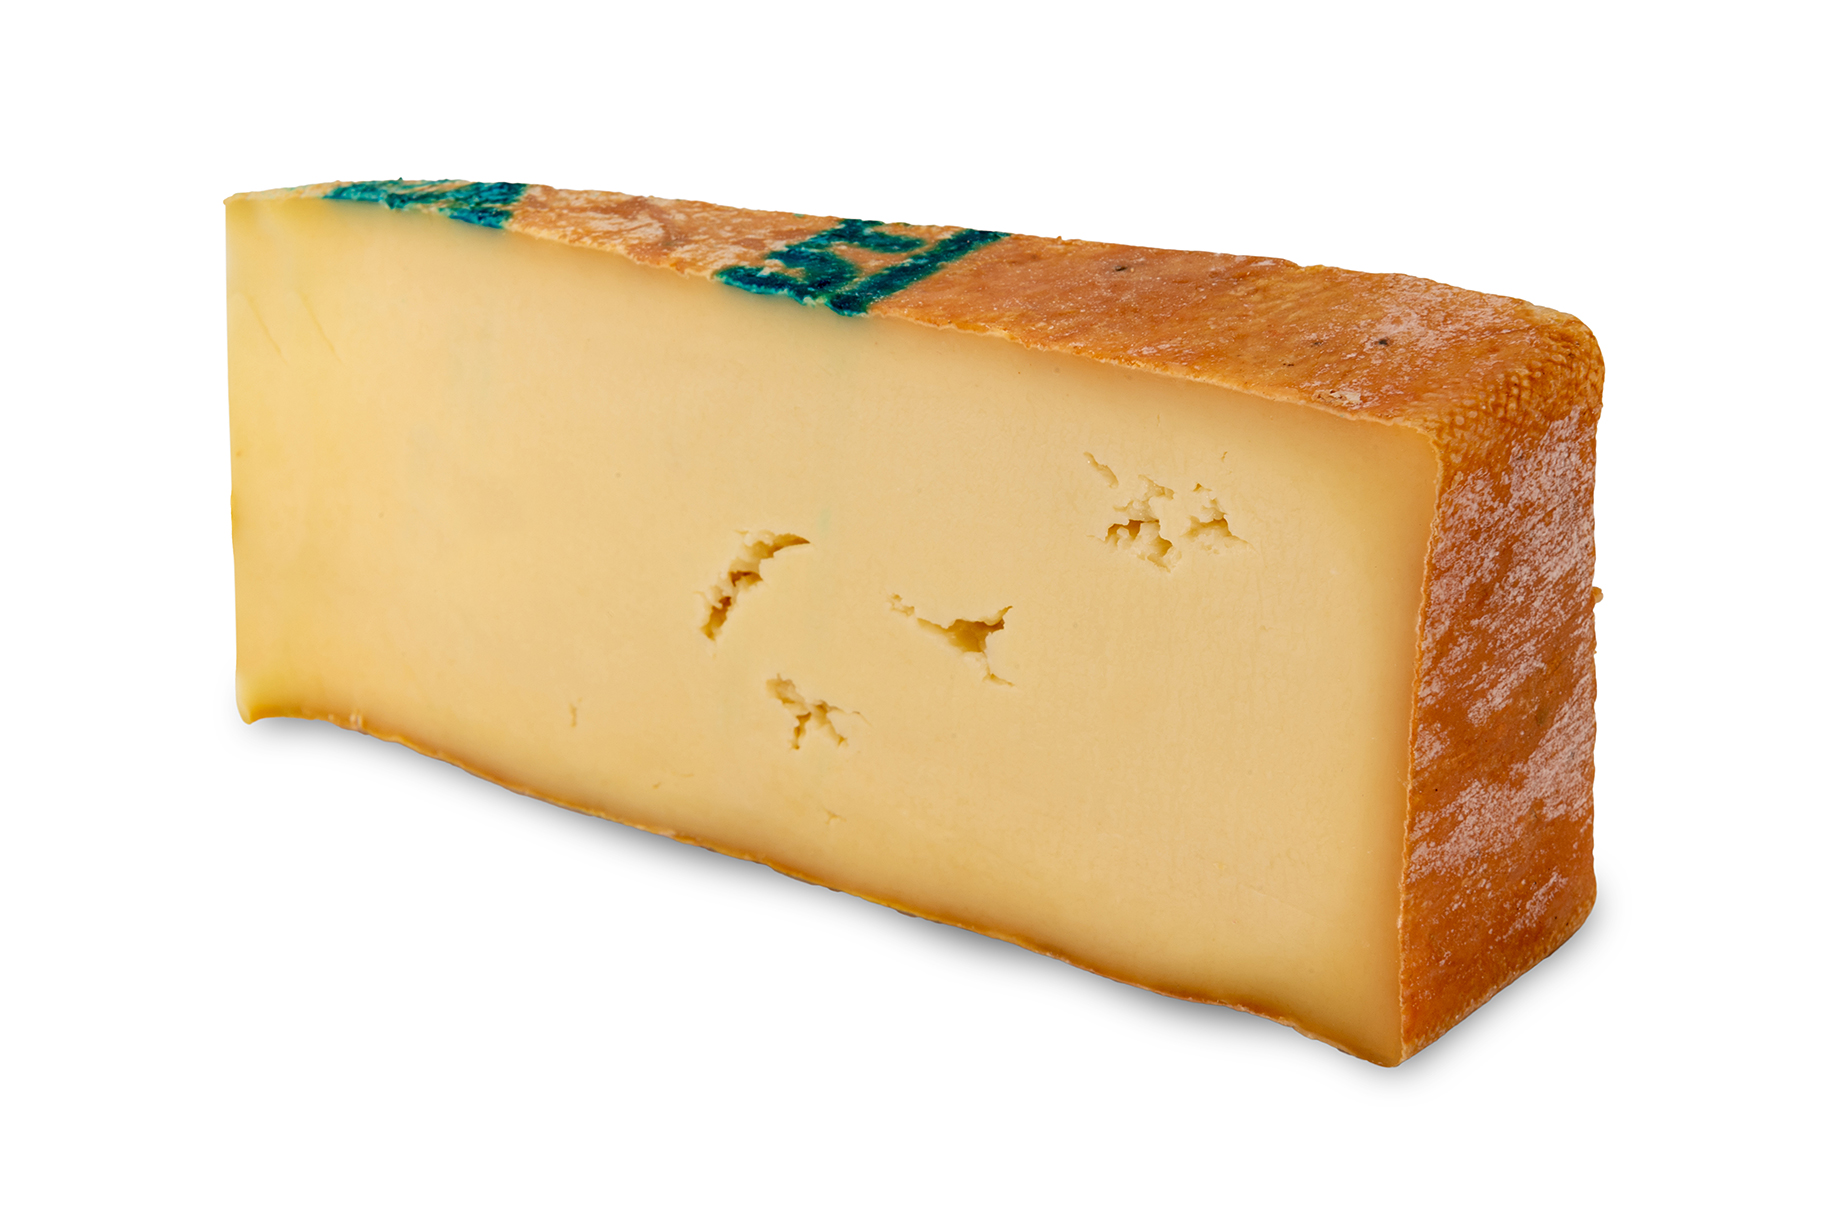 Fontina cheese From Aosta Valle, Italy, Made With Milk From Cows Grazing In The Mountains Pasture